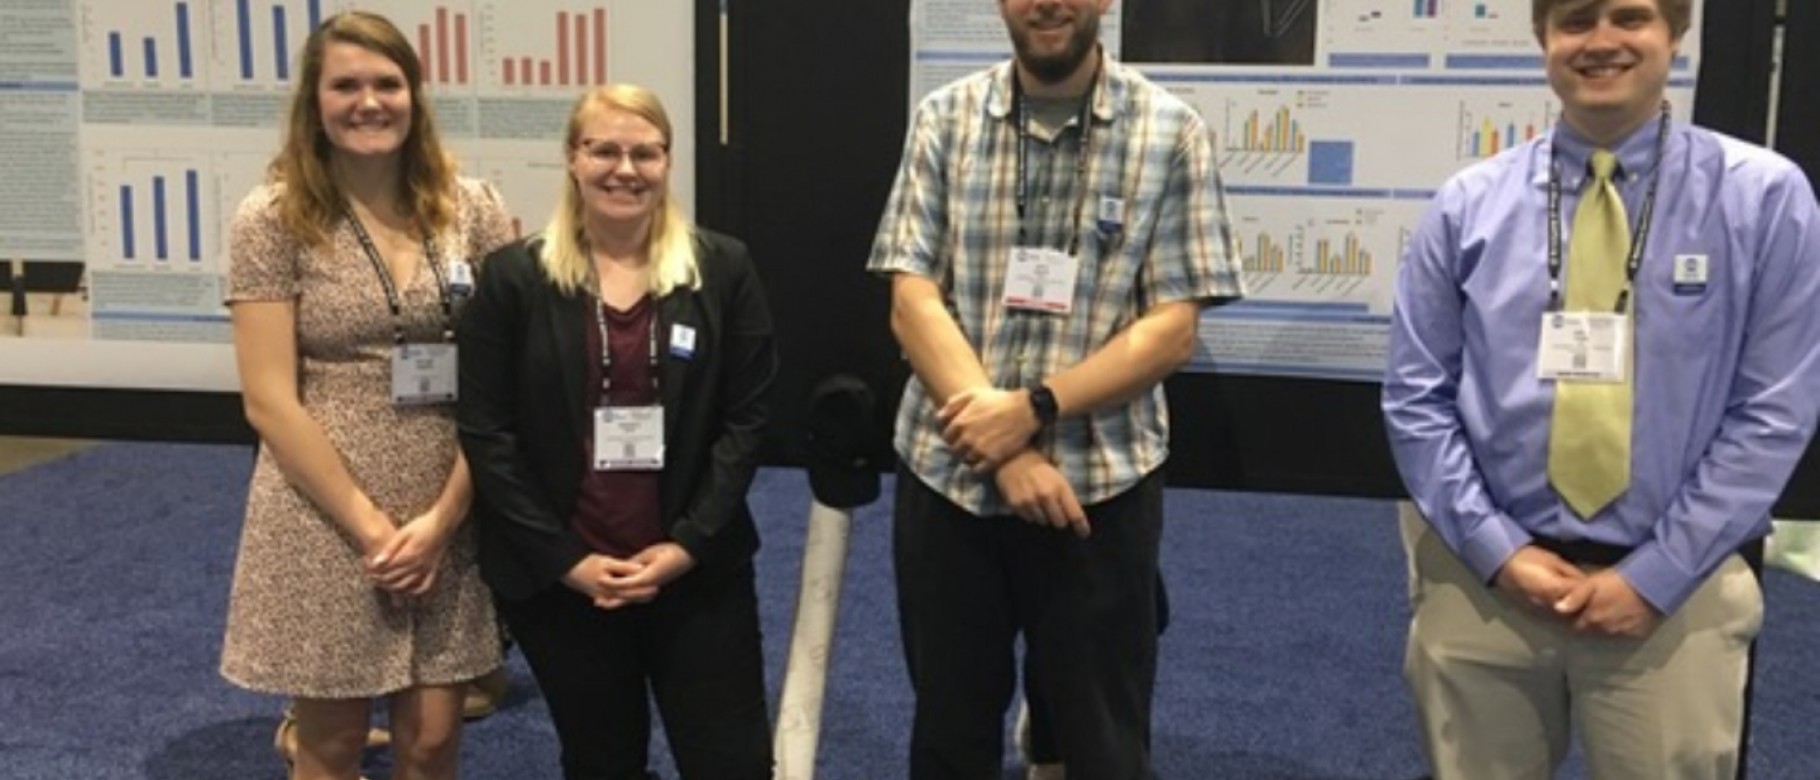 UNE students, faculty and professional staff recently attended the world's largest neuroscience meeting